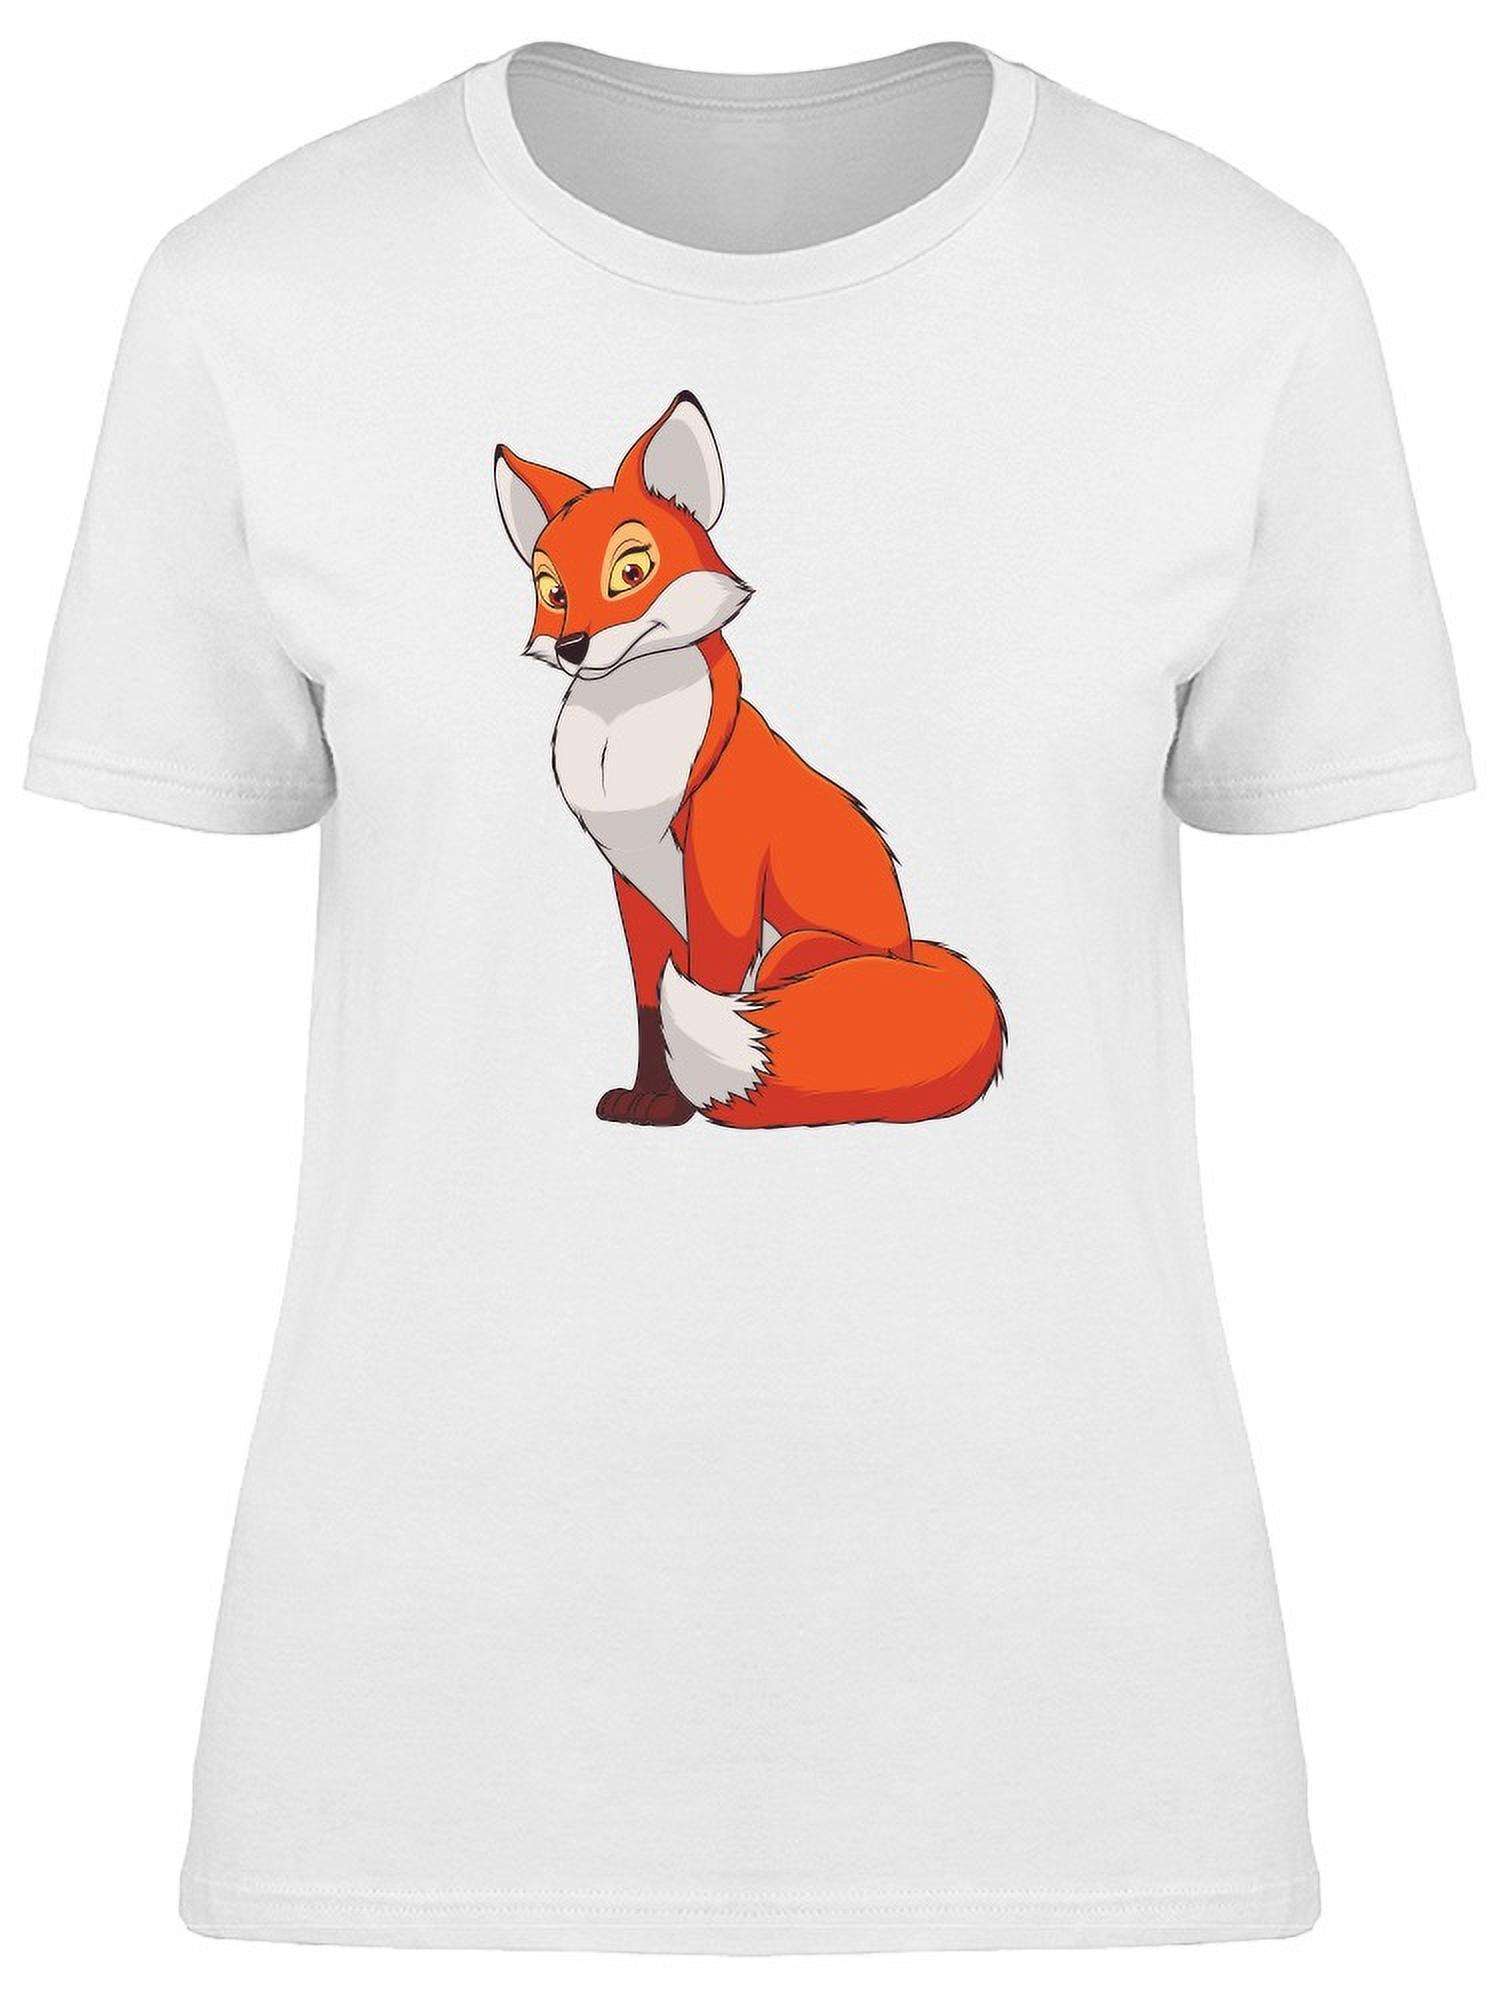 Cute Female Red Fox T-Shirt Women -Image by Shutterstock, Female XX-Large - image 1 of 2